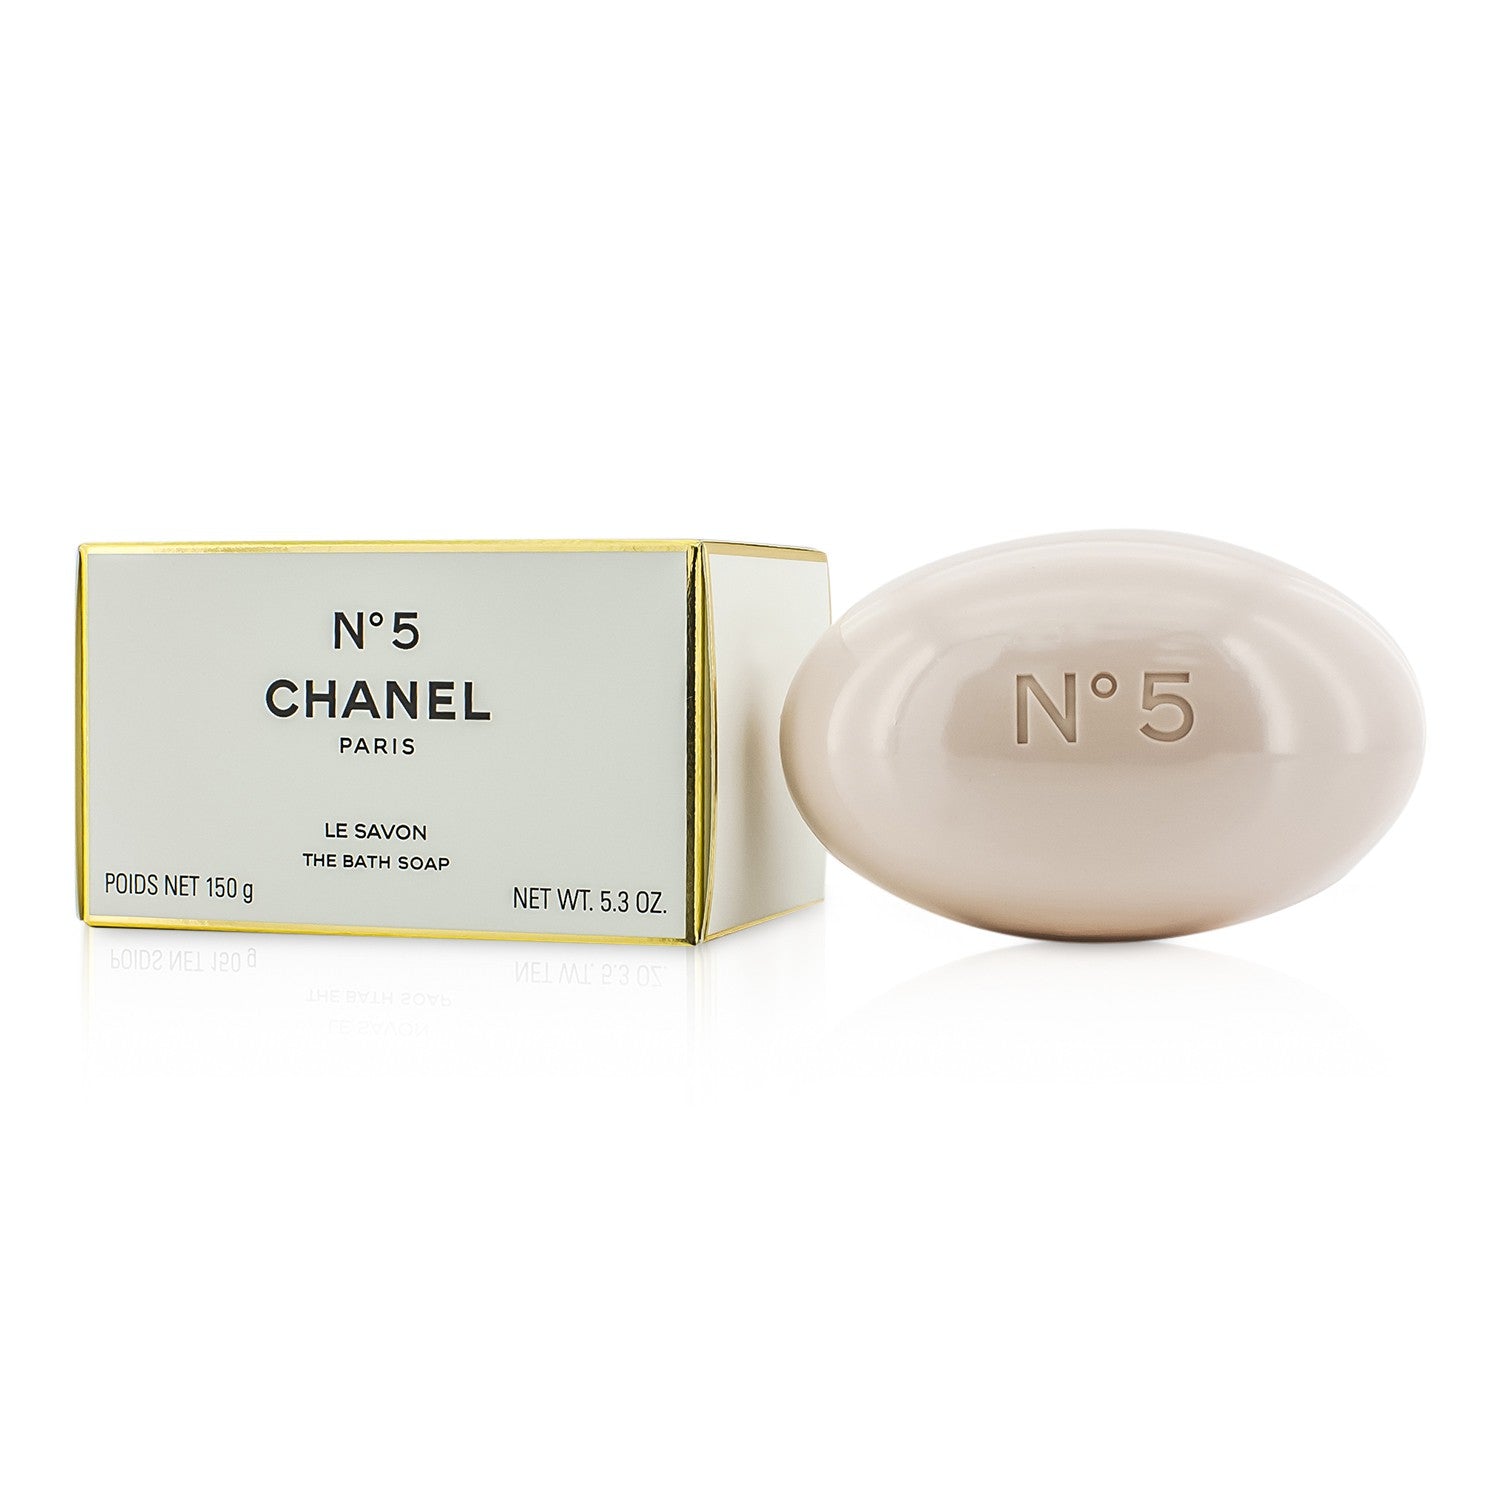 Best Coco Chanel Soap for sale in Mooresville, North Carolina for 2023